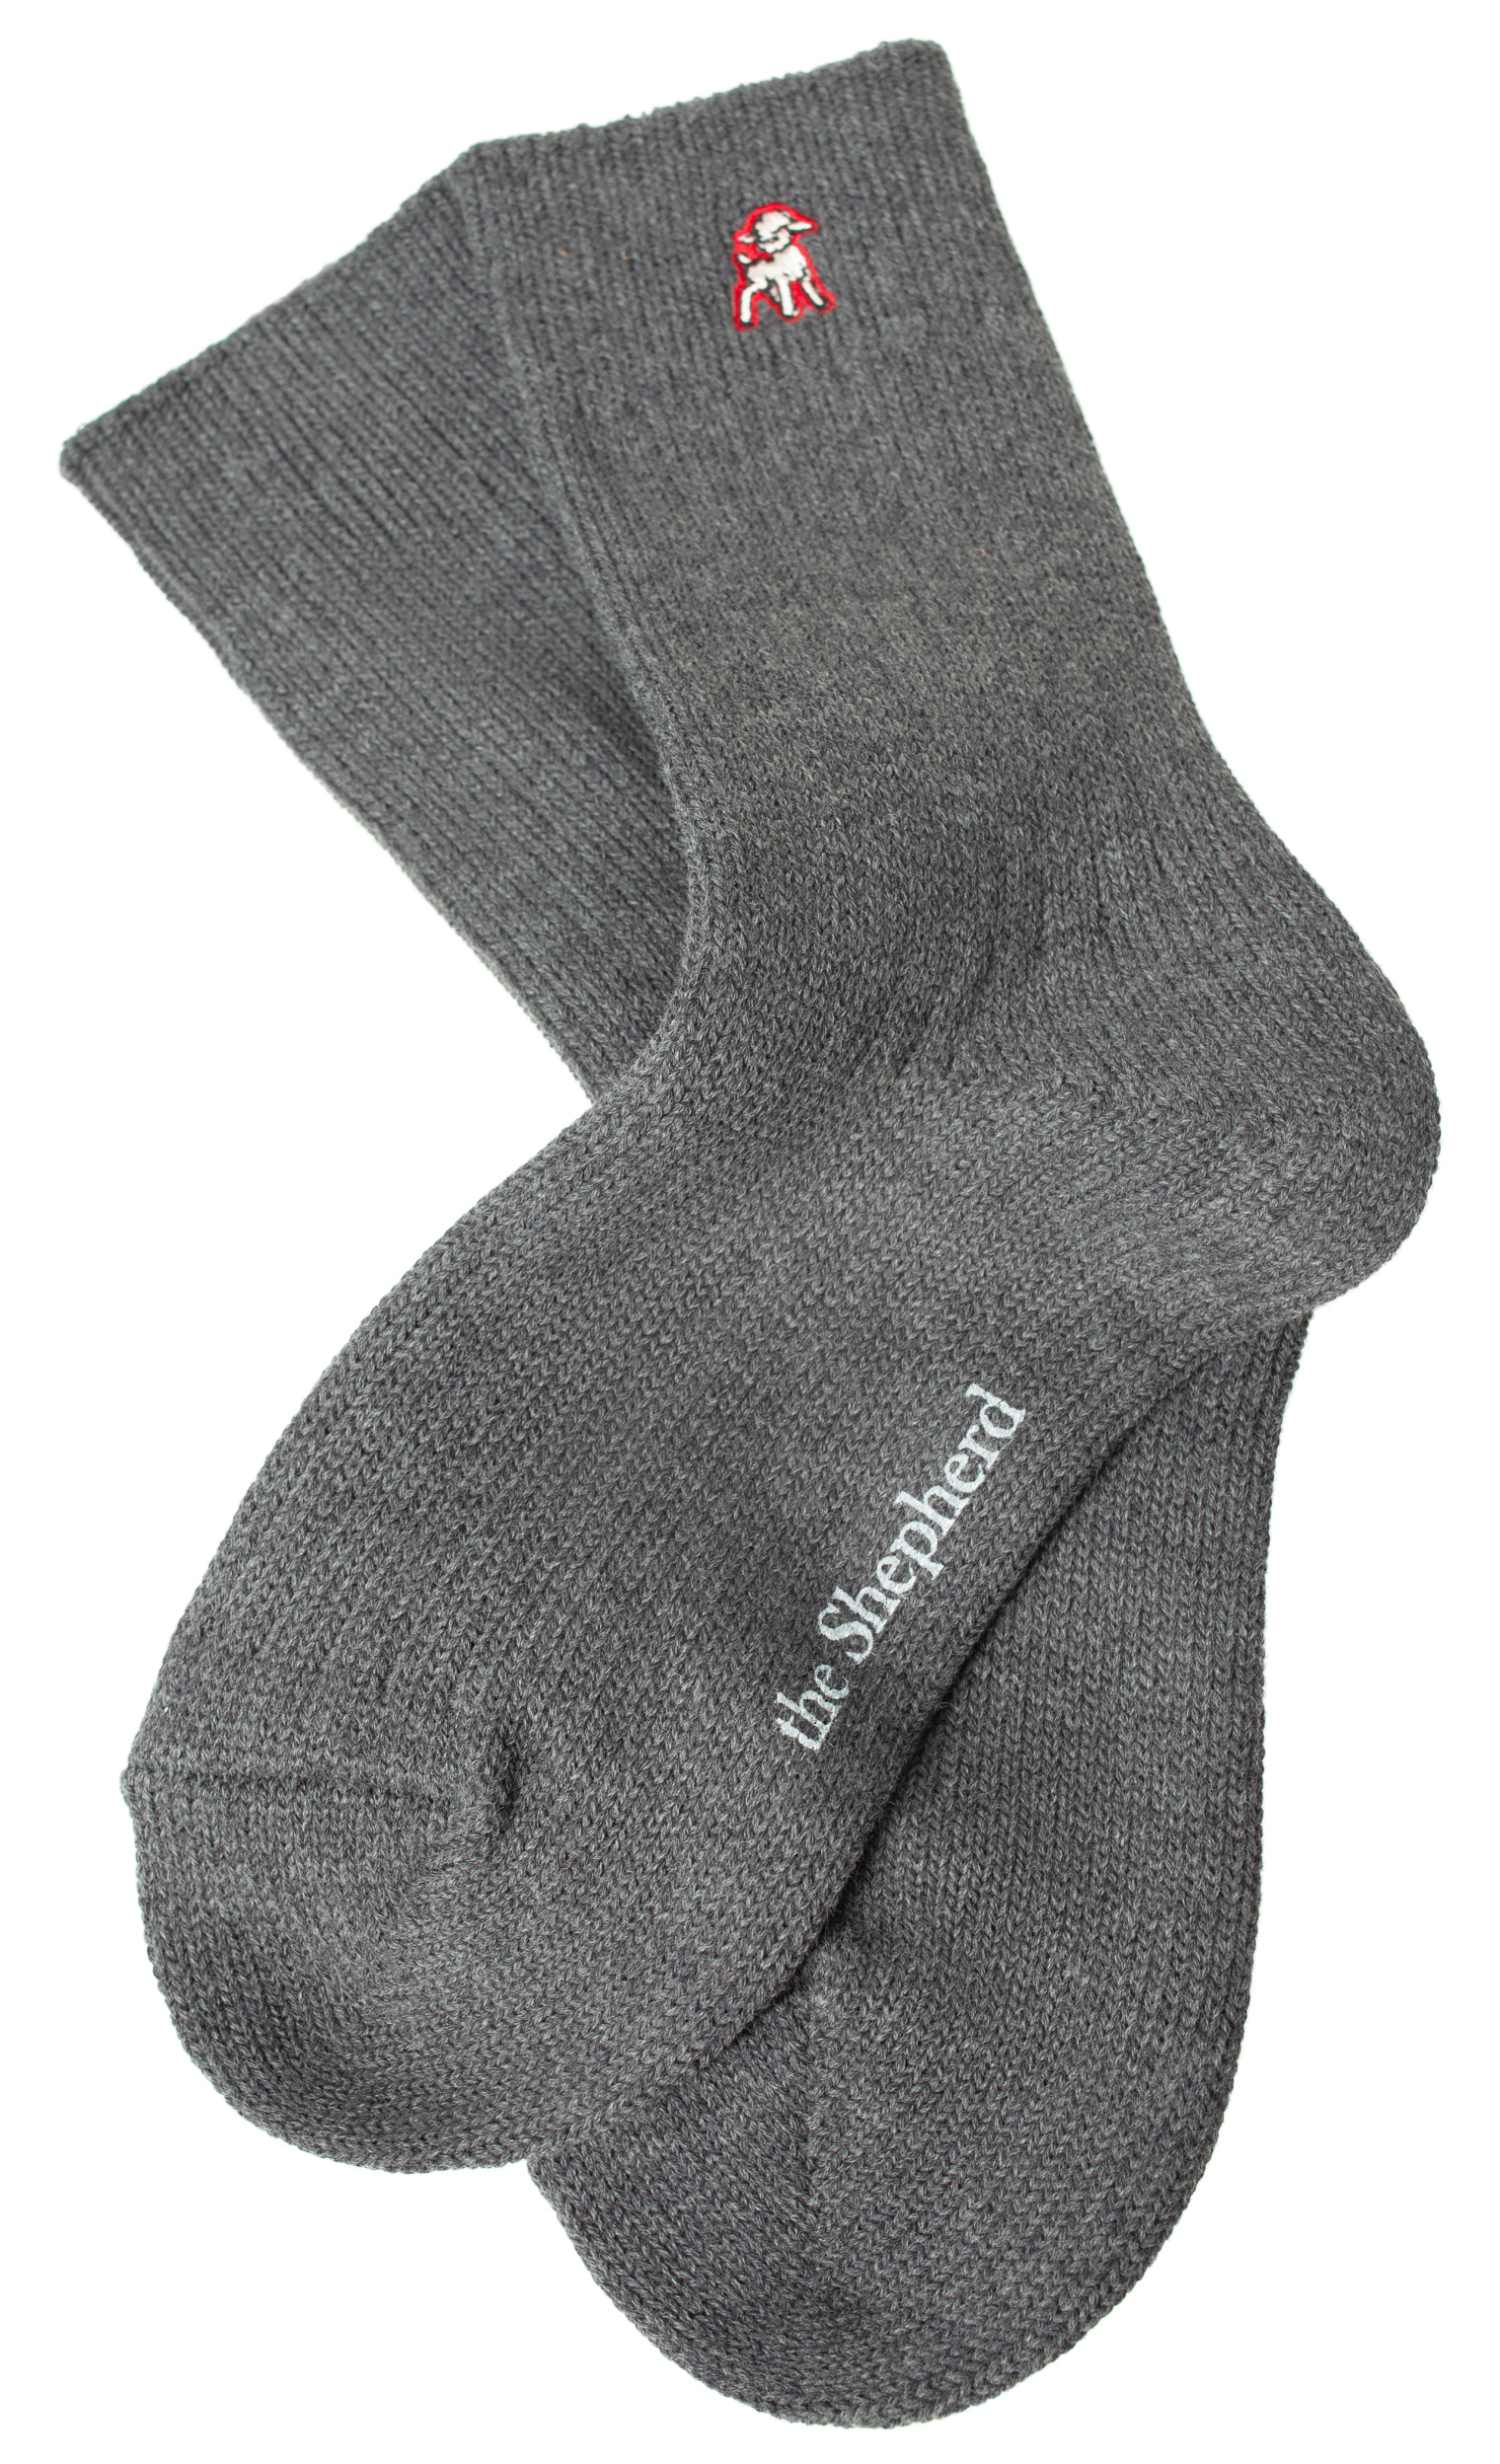 Undercover Grey embroidered socks